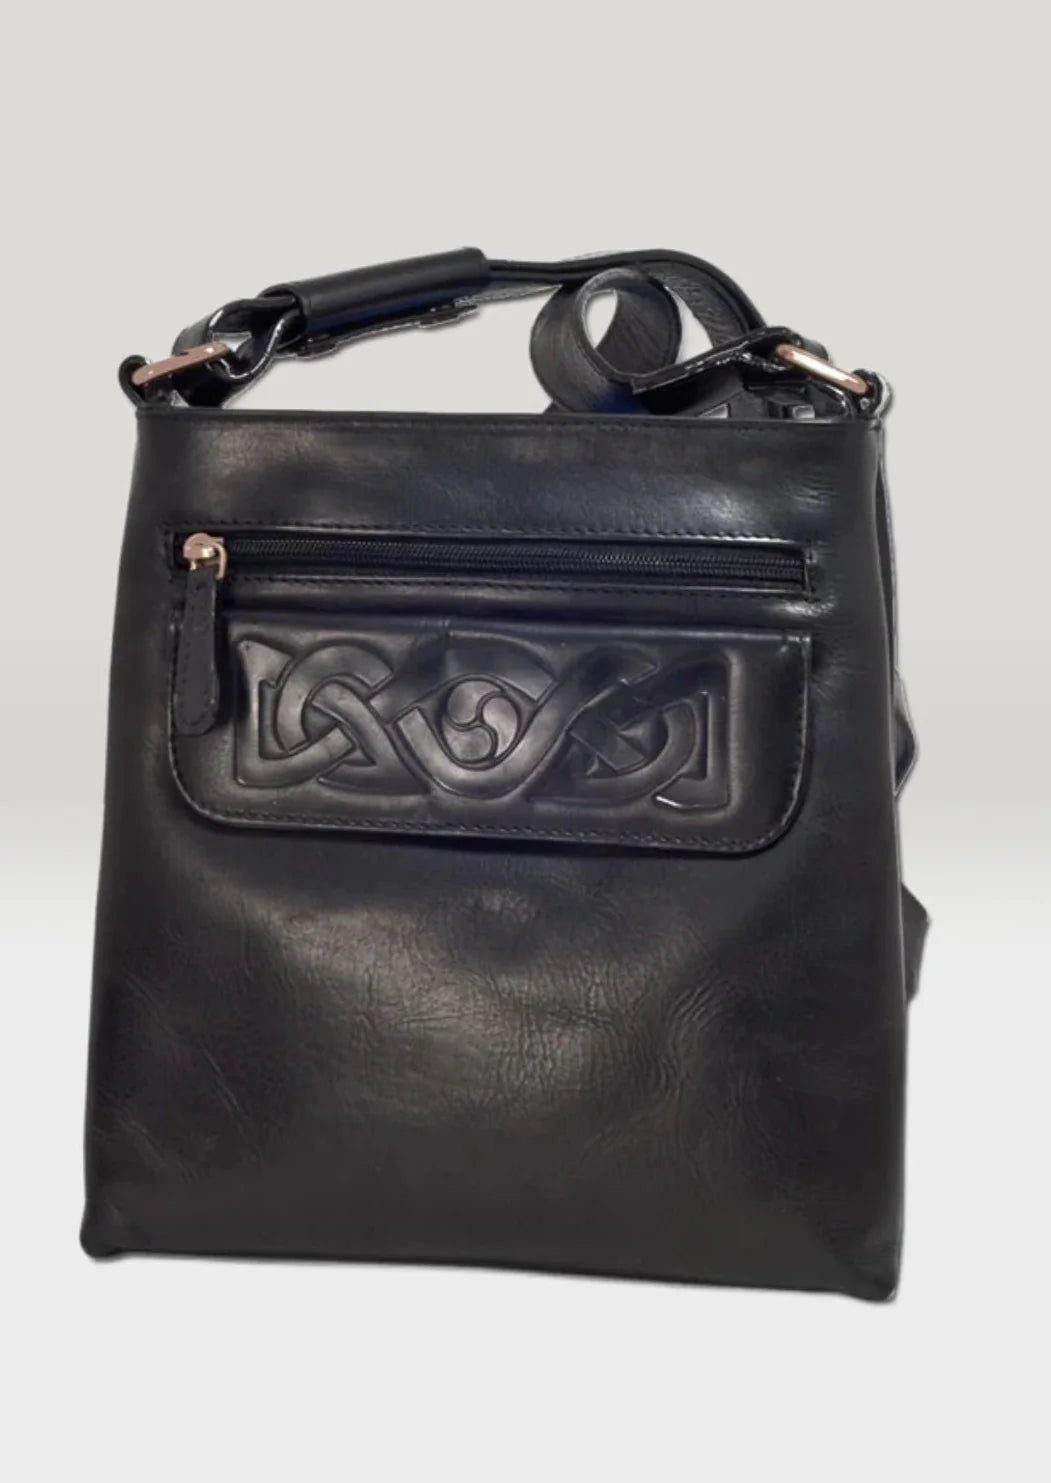 Lee River Black Leather Mary Bag